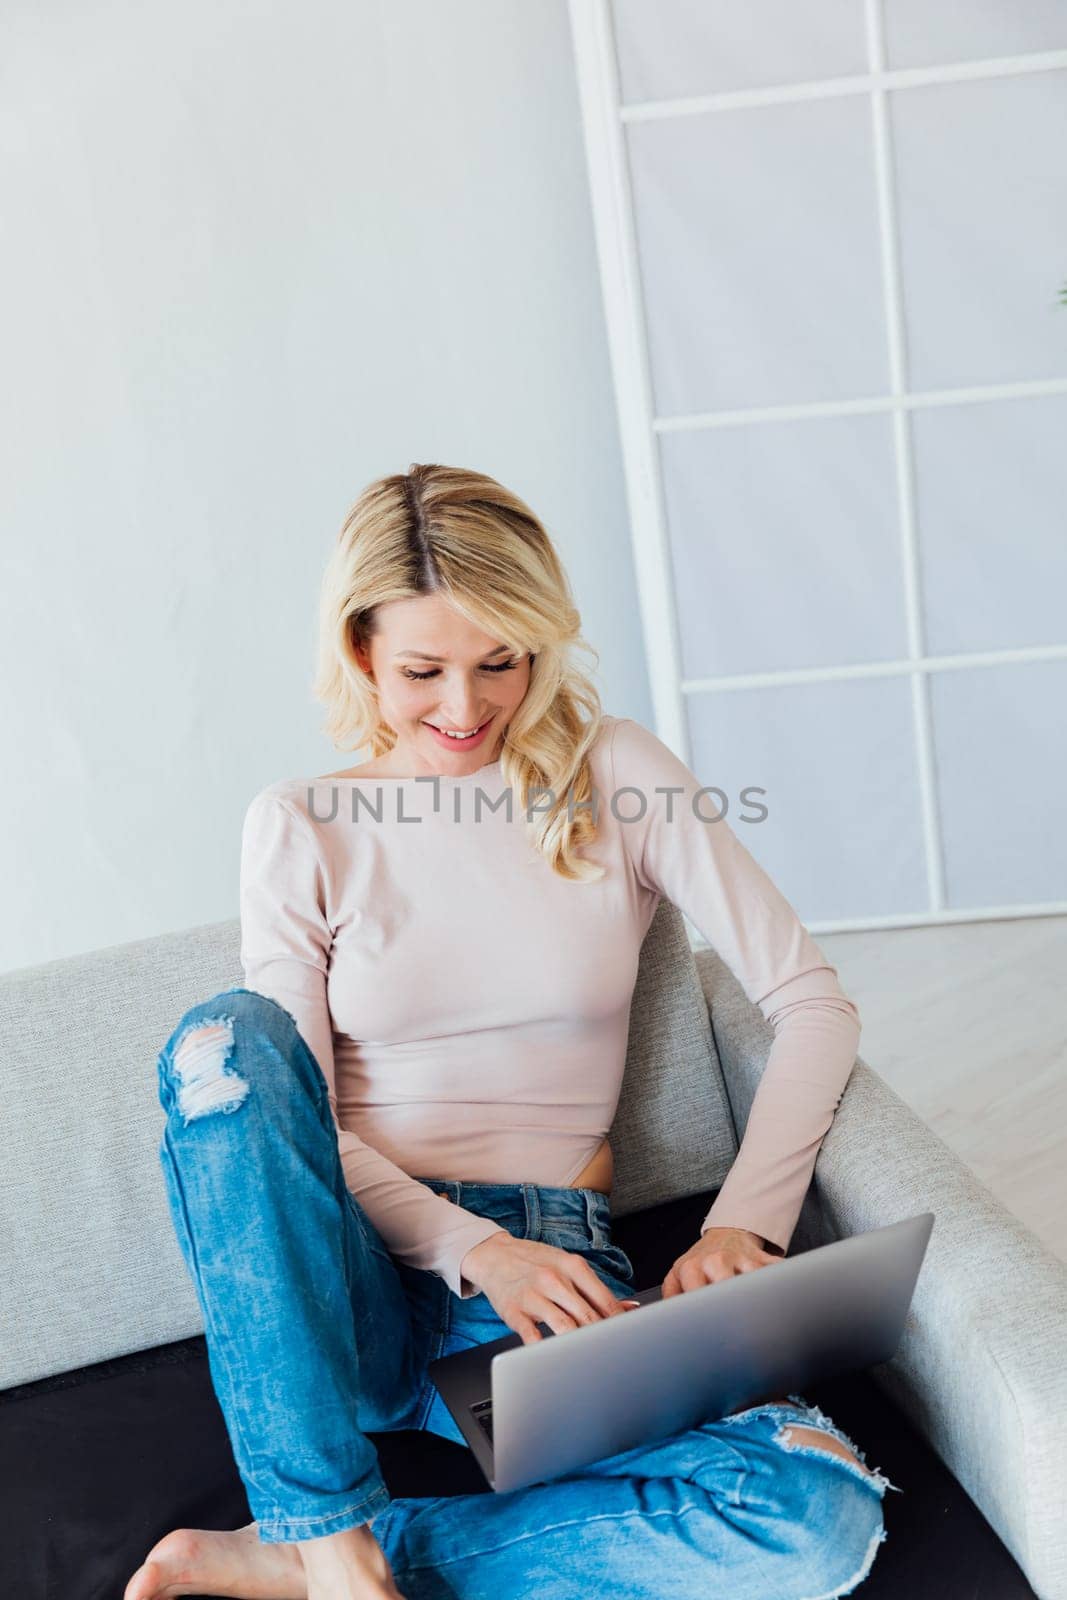 a woman with a laptop in the room works remotely online internet communication by Simakov